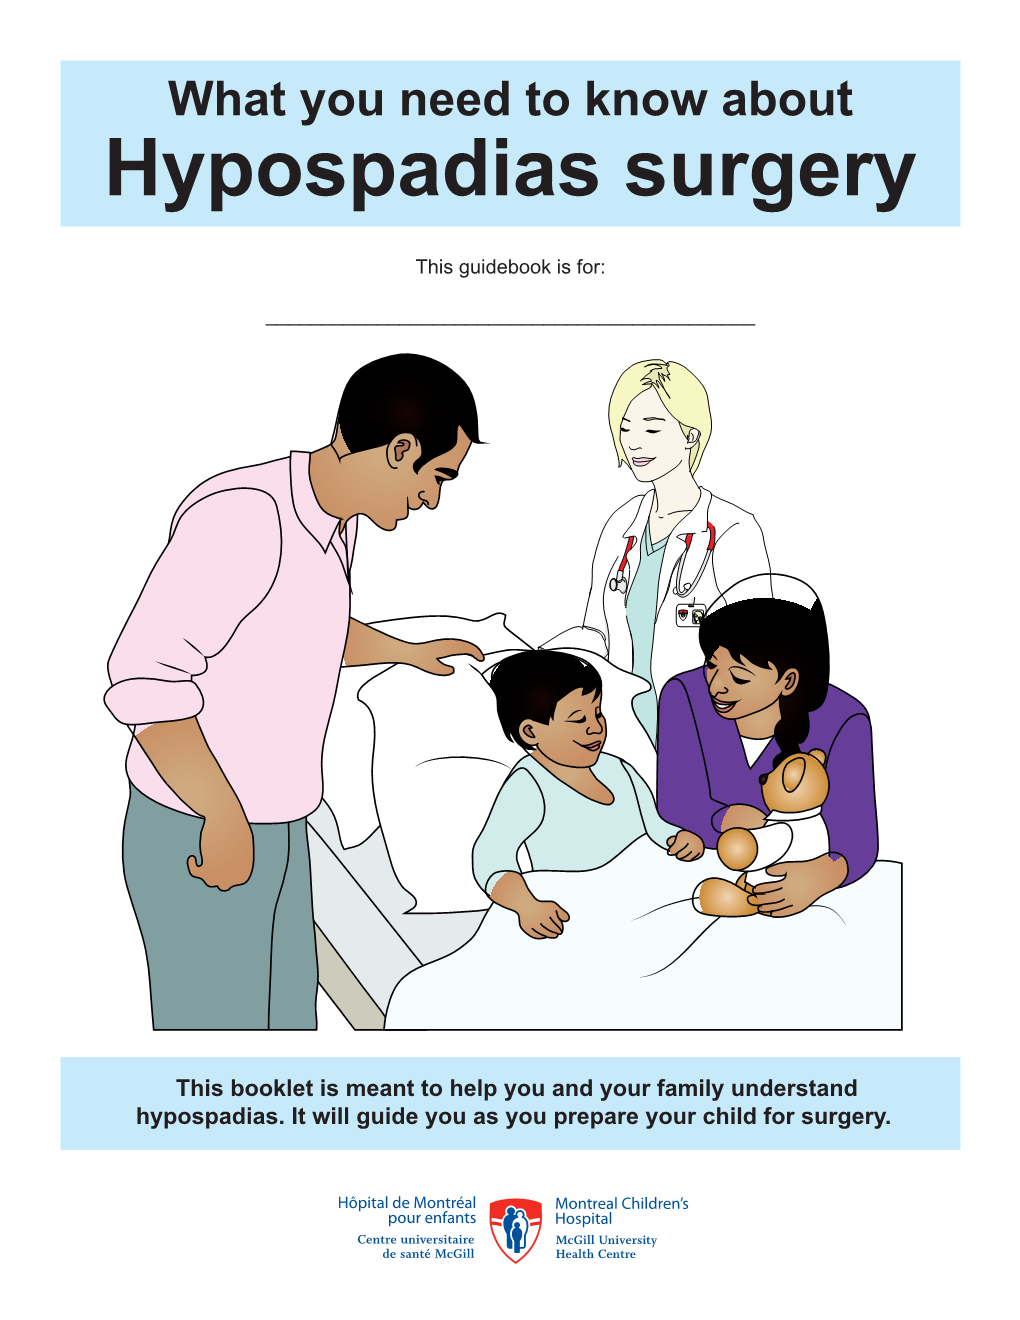 What You Need to Know About Hypospadias Surgery